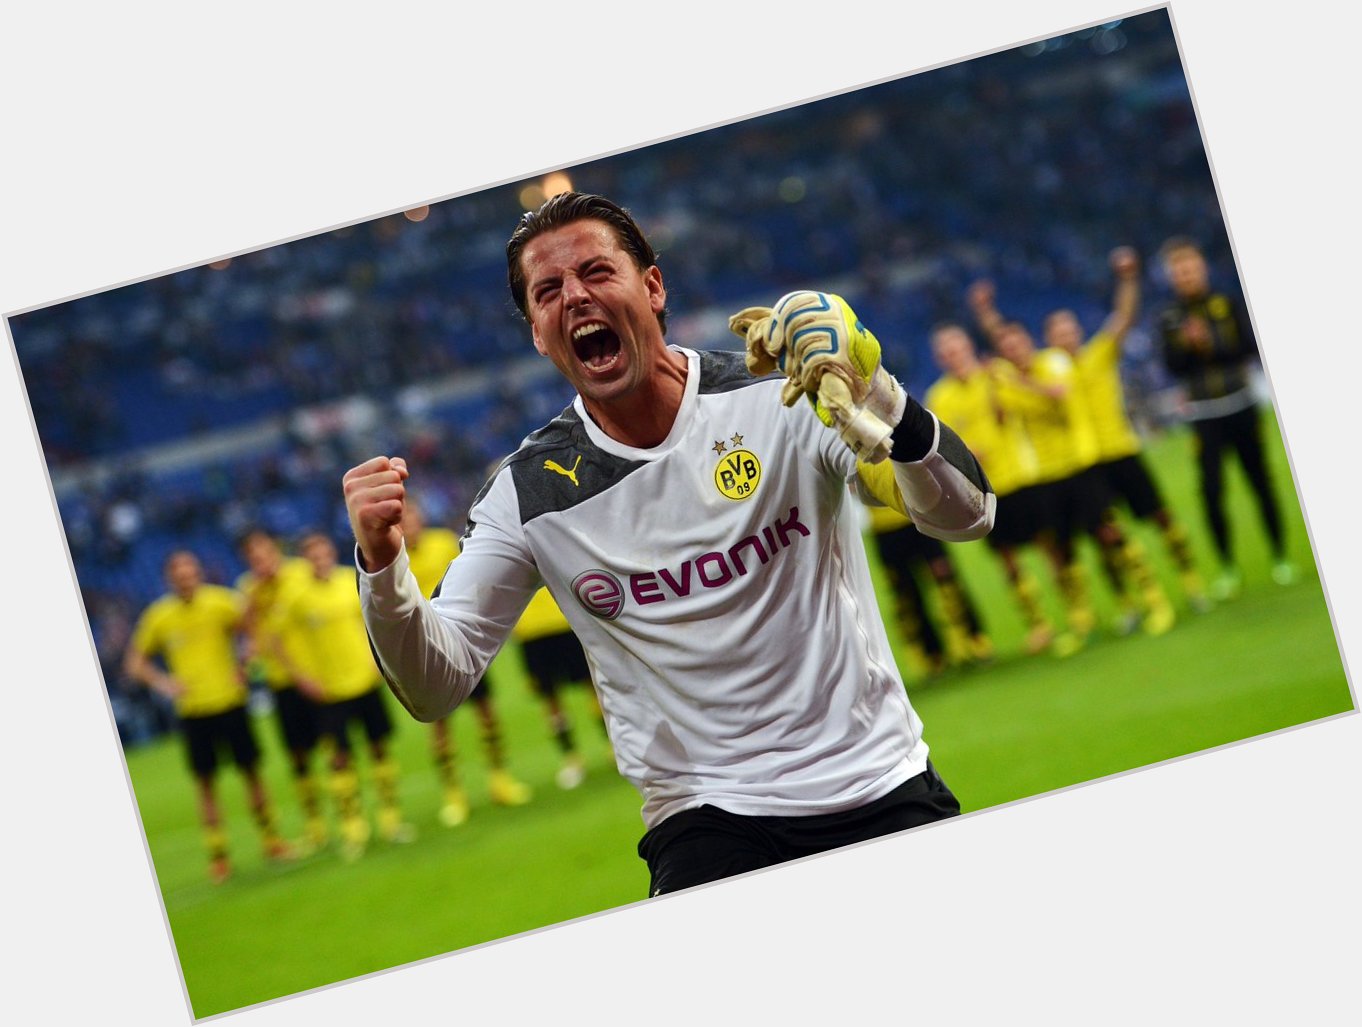 Roman Weidenfeller

One of the best to ever wear the black and yellow uniform. Happy 41st birthday, king 